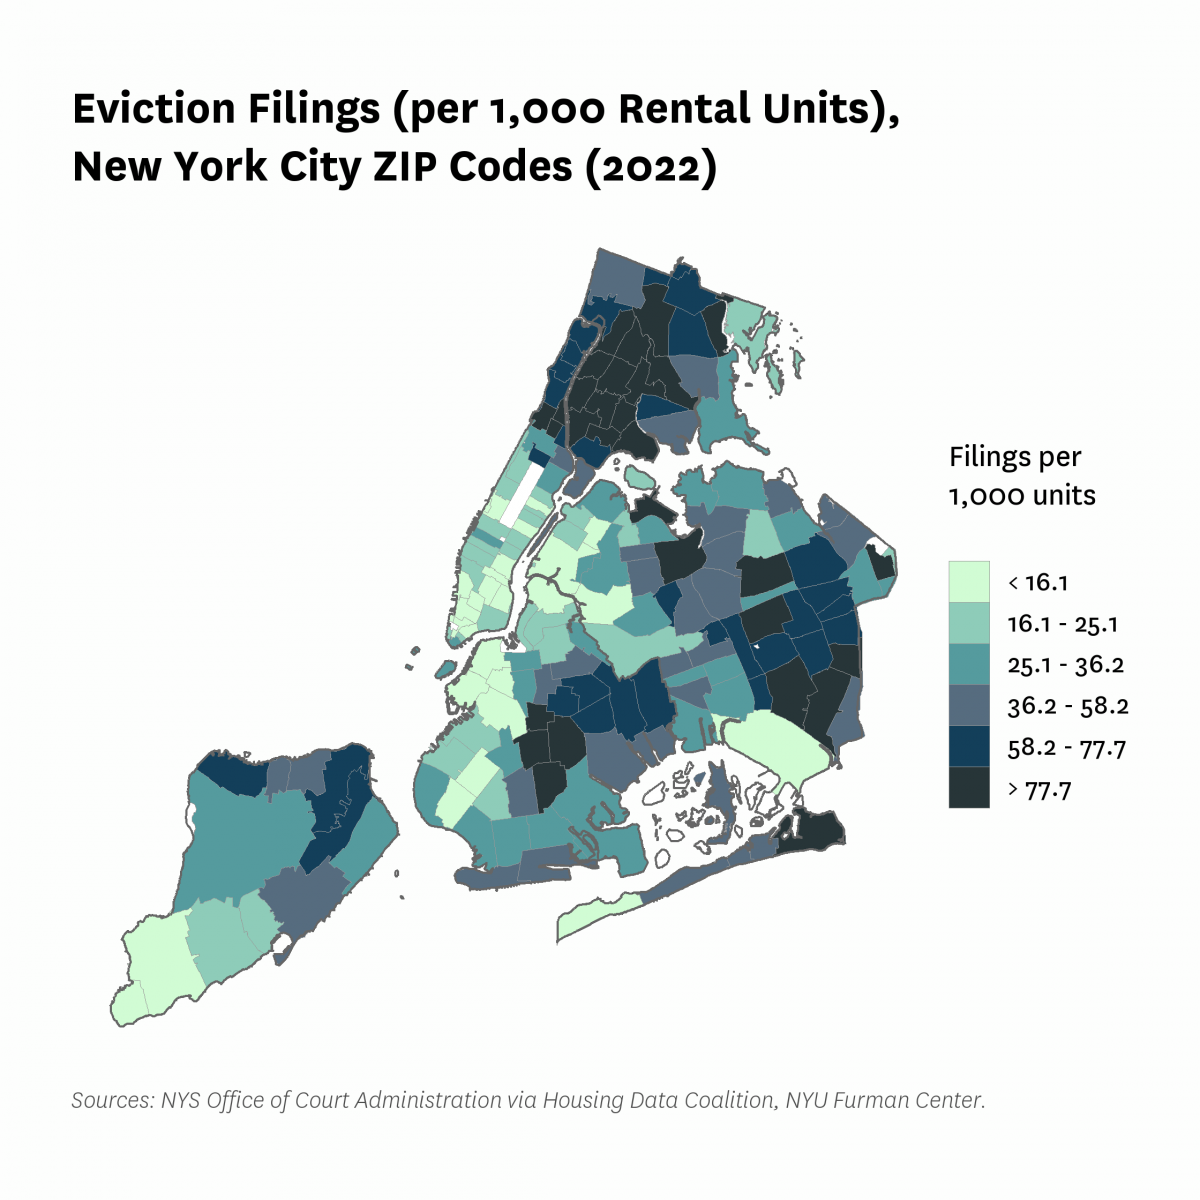 Map showing the 2022 eviction filing rates by zip code in New York City.